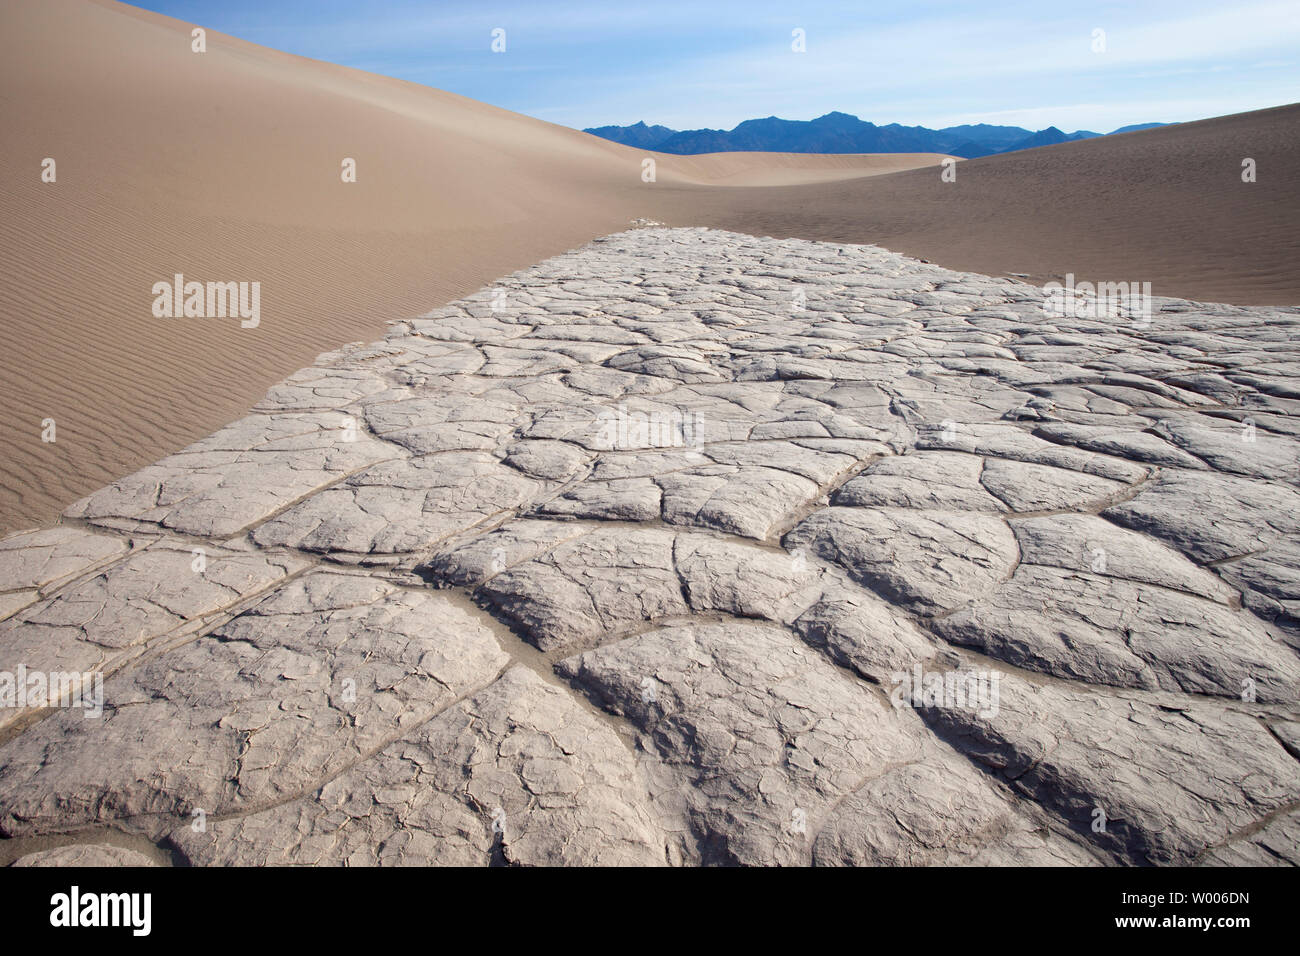 Mudcracks (dessication cracks) on dry lake bed surrounded by sand dunes in the Mojave Desert, Death Valley National Park, California, USA Stock Photo